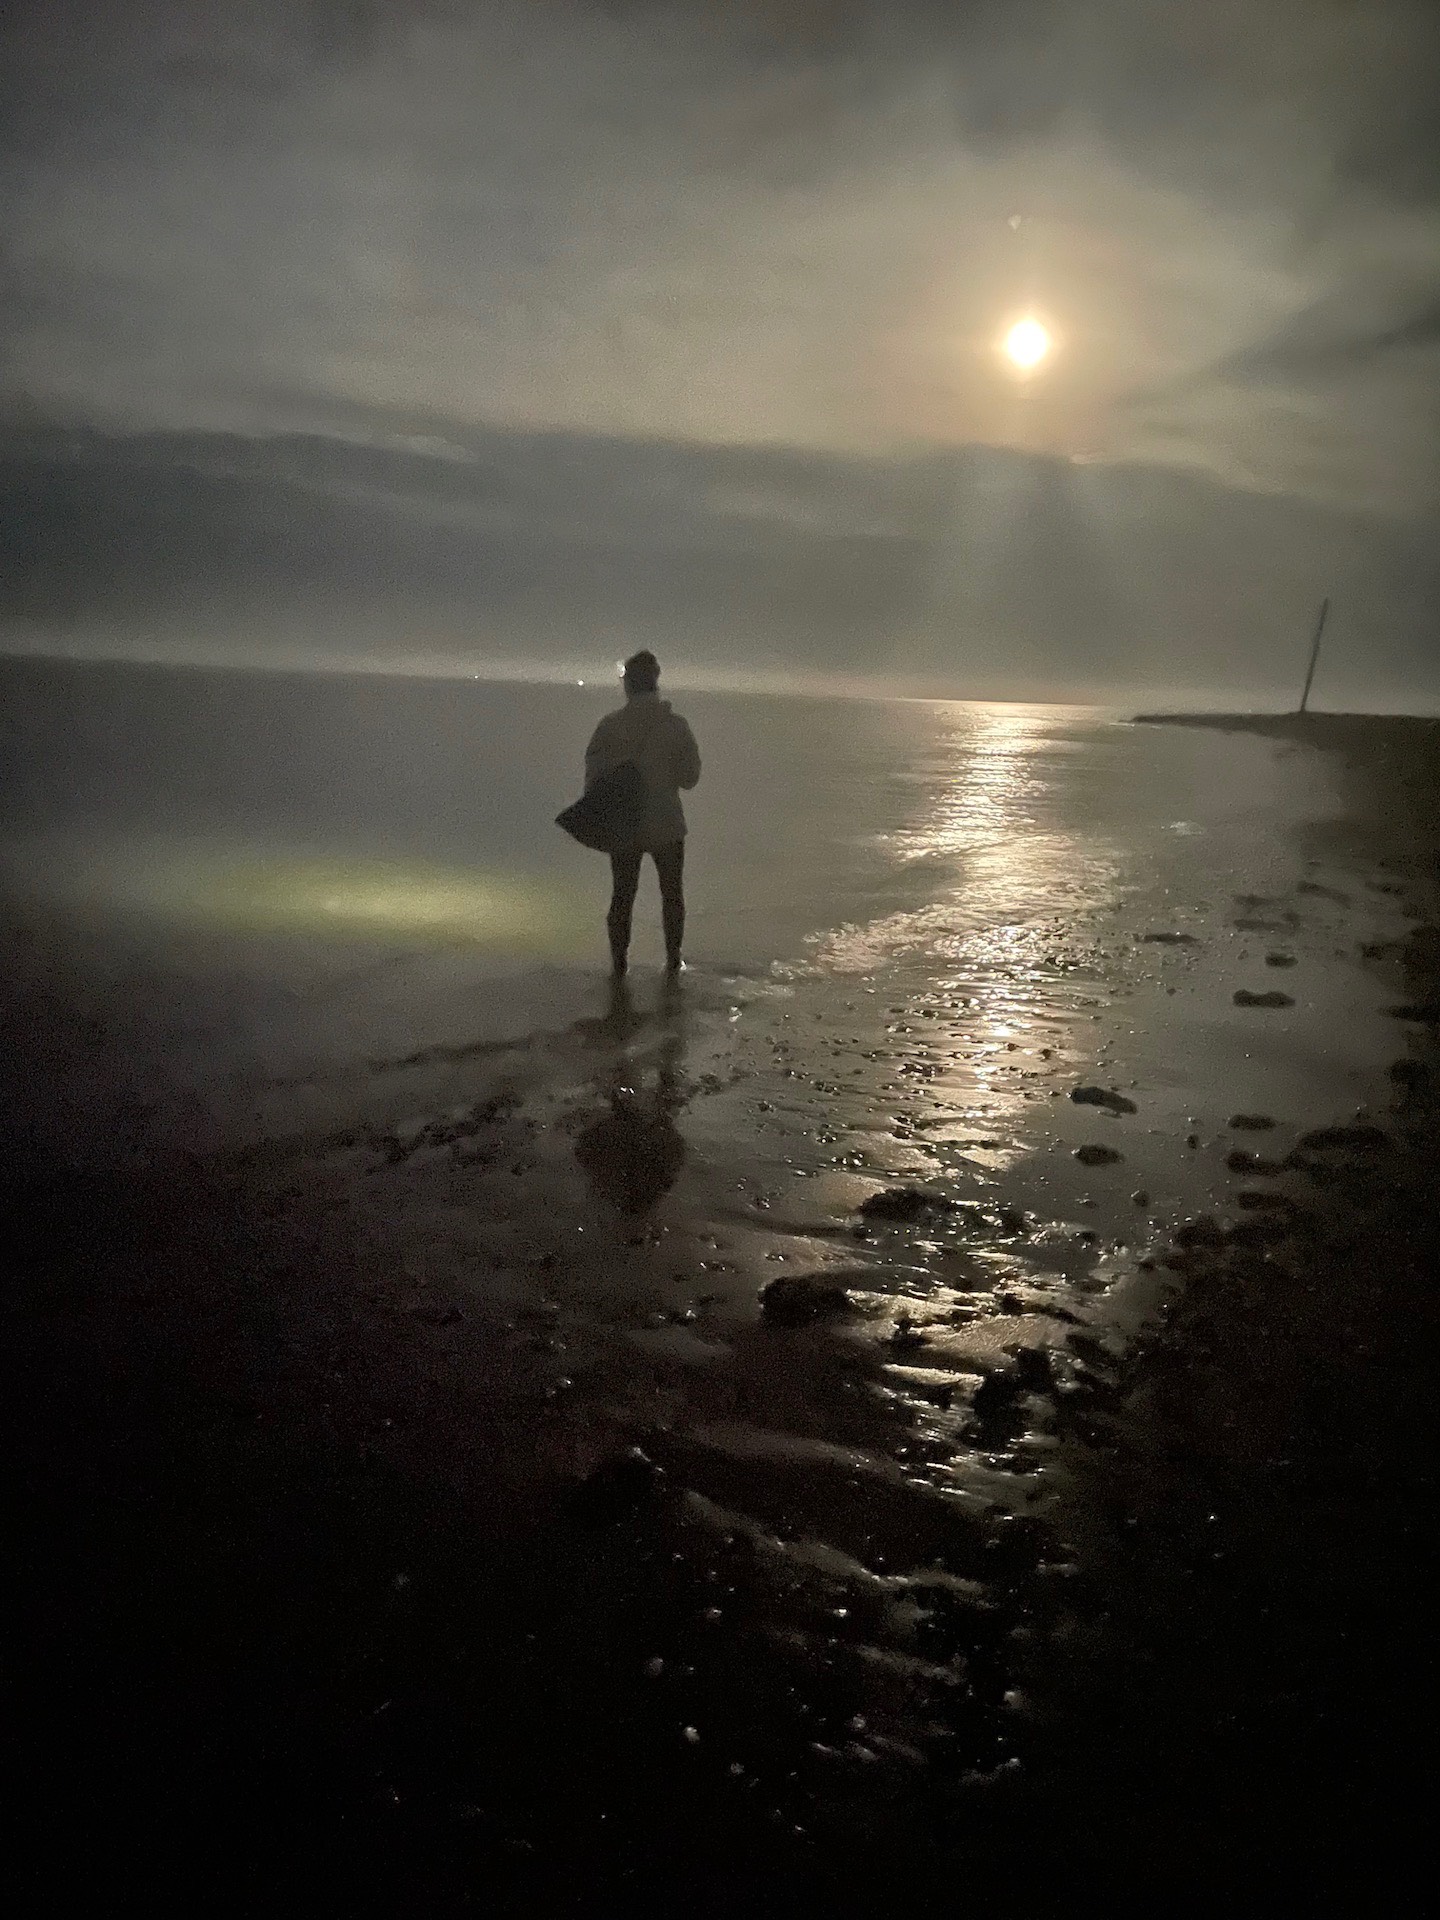 Silhouette of person standing on a beach at sunset